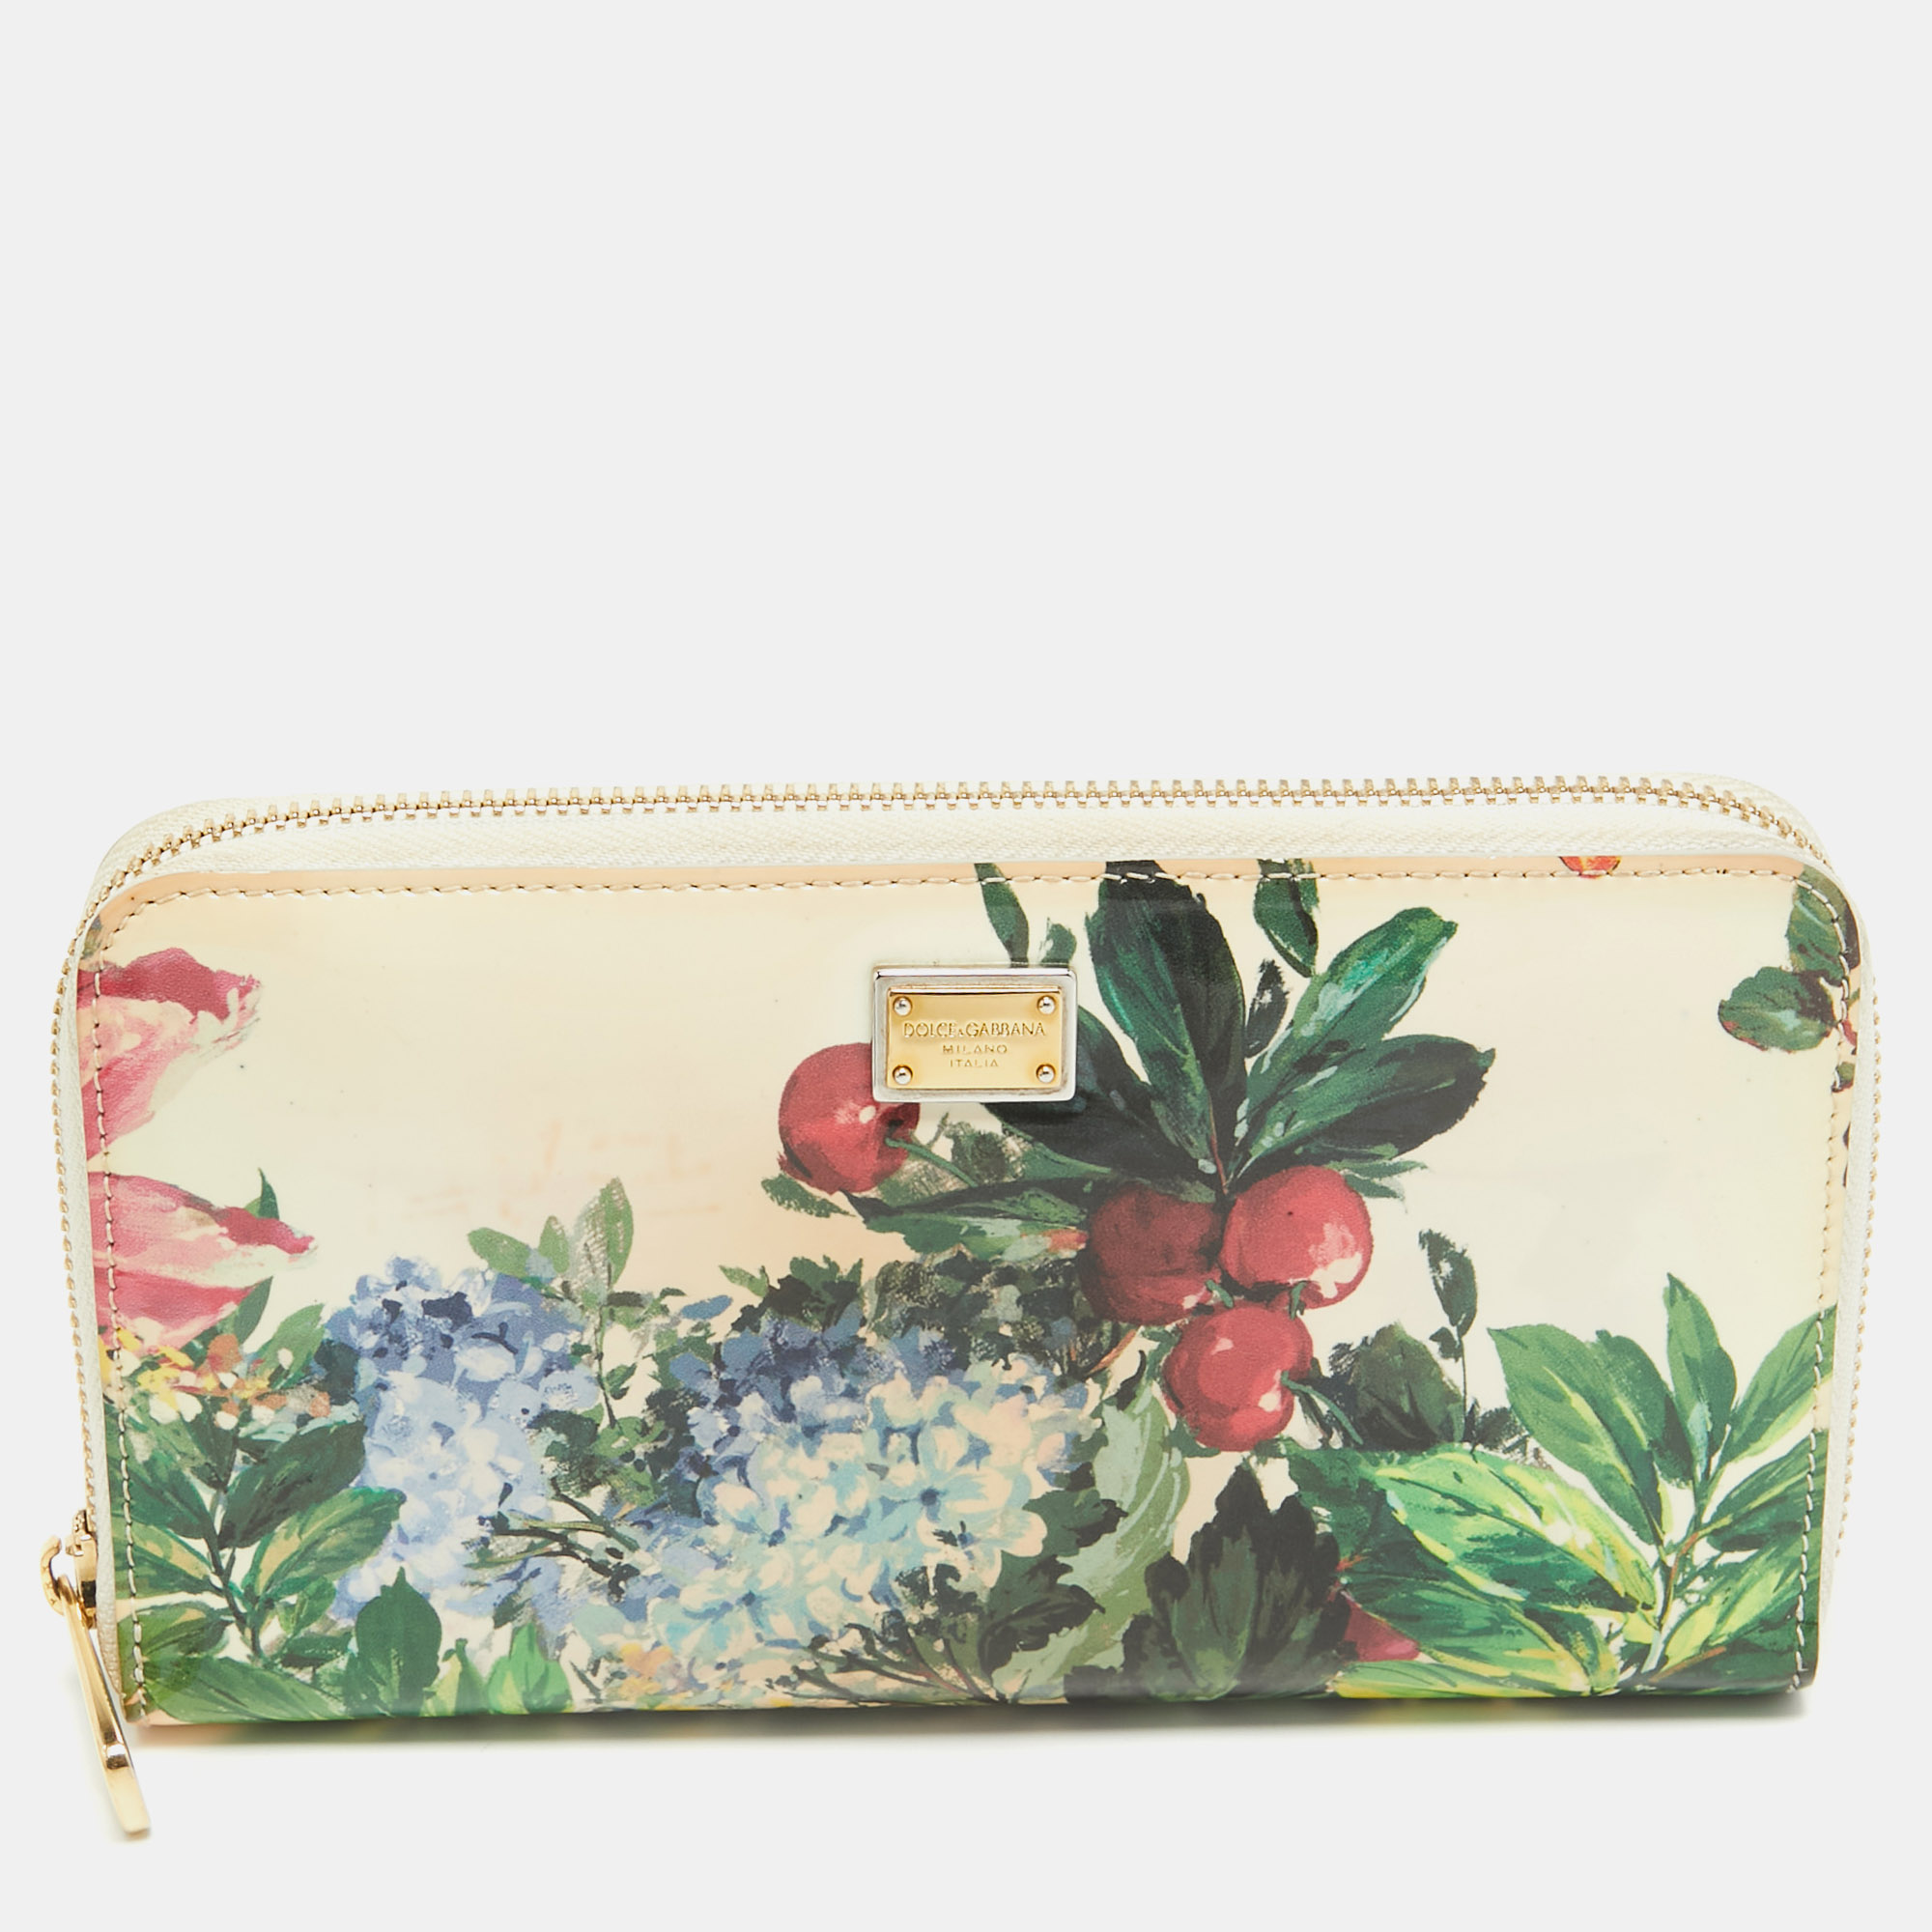 Pre-owned Dolce & Gabbana Multicolor Printed Patent Leather Zip Around Continental Wallet